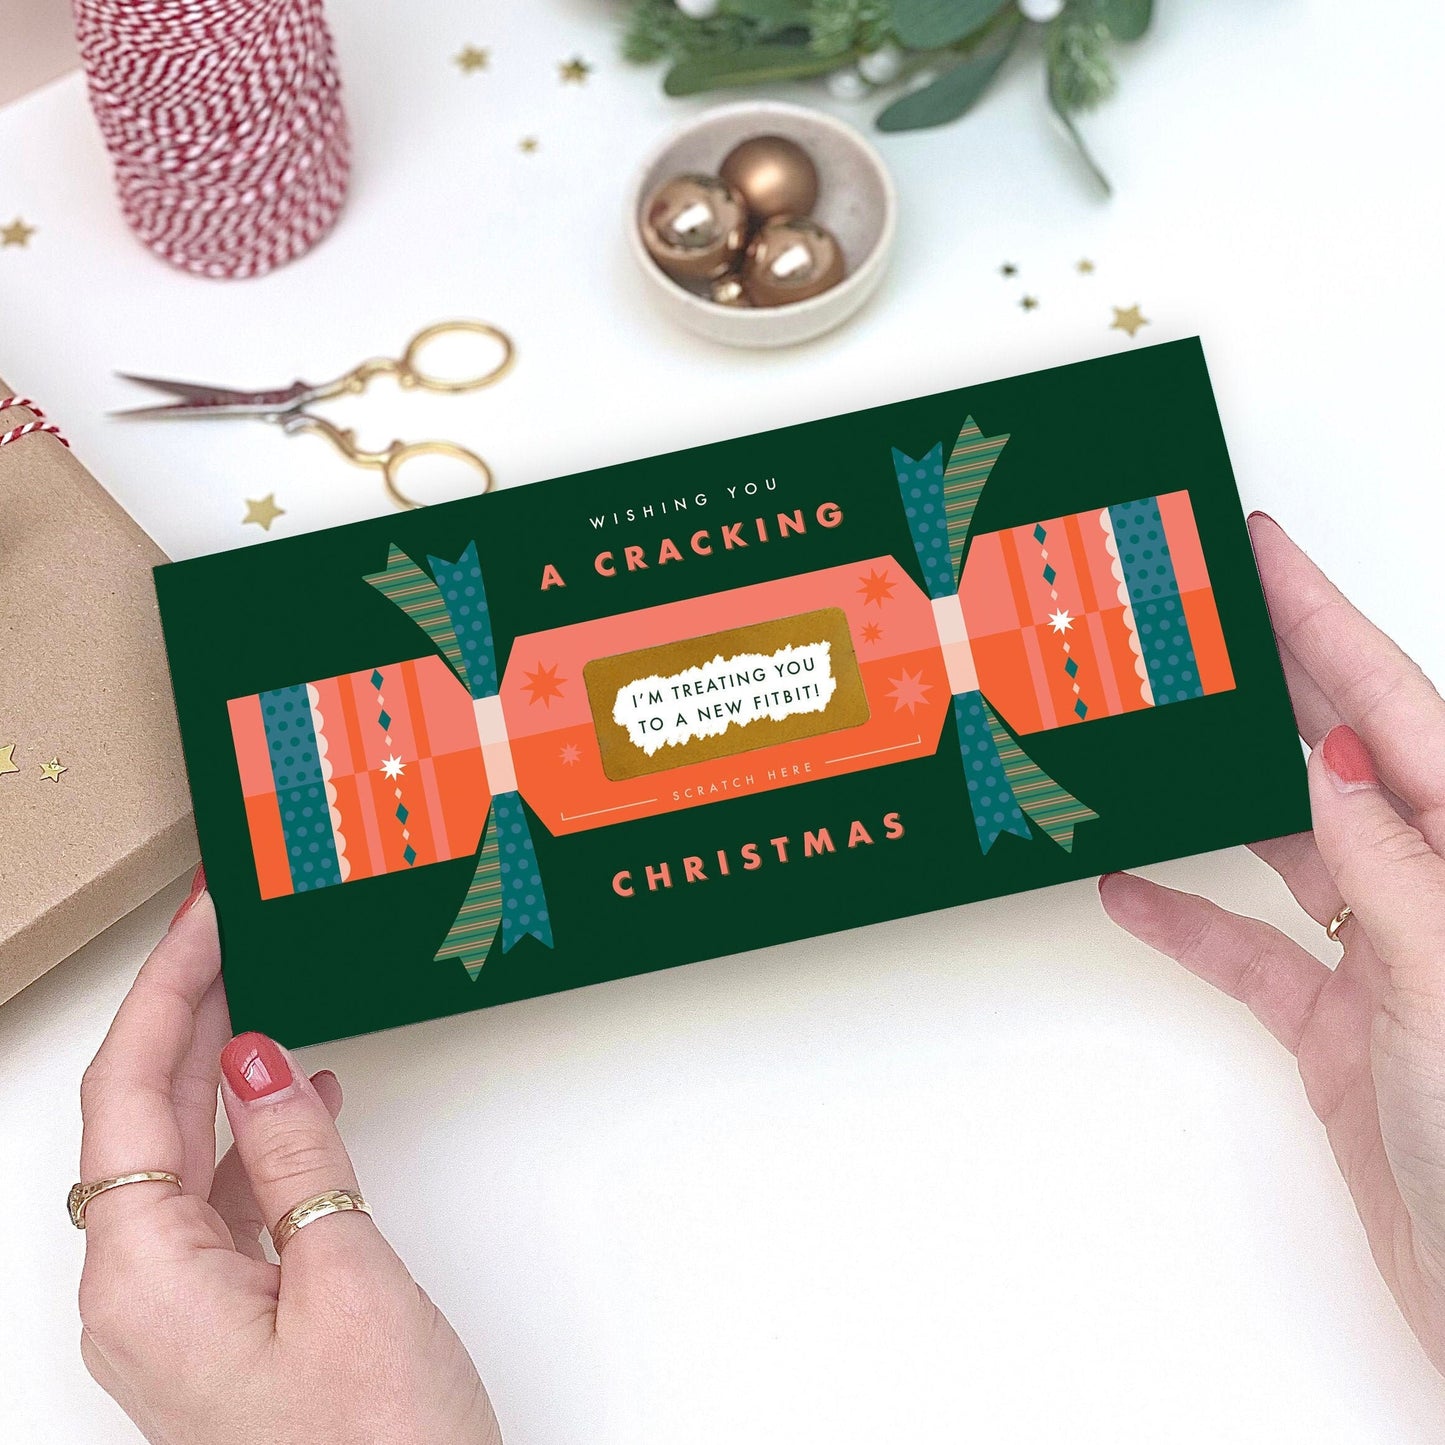 Cracking Christmas Surprise Reveal Scratch Card